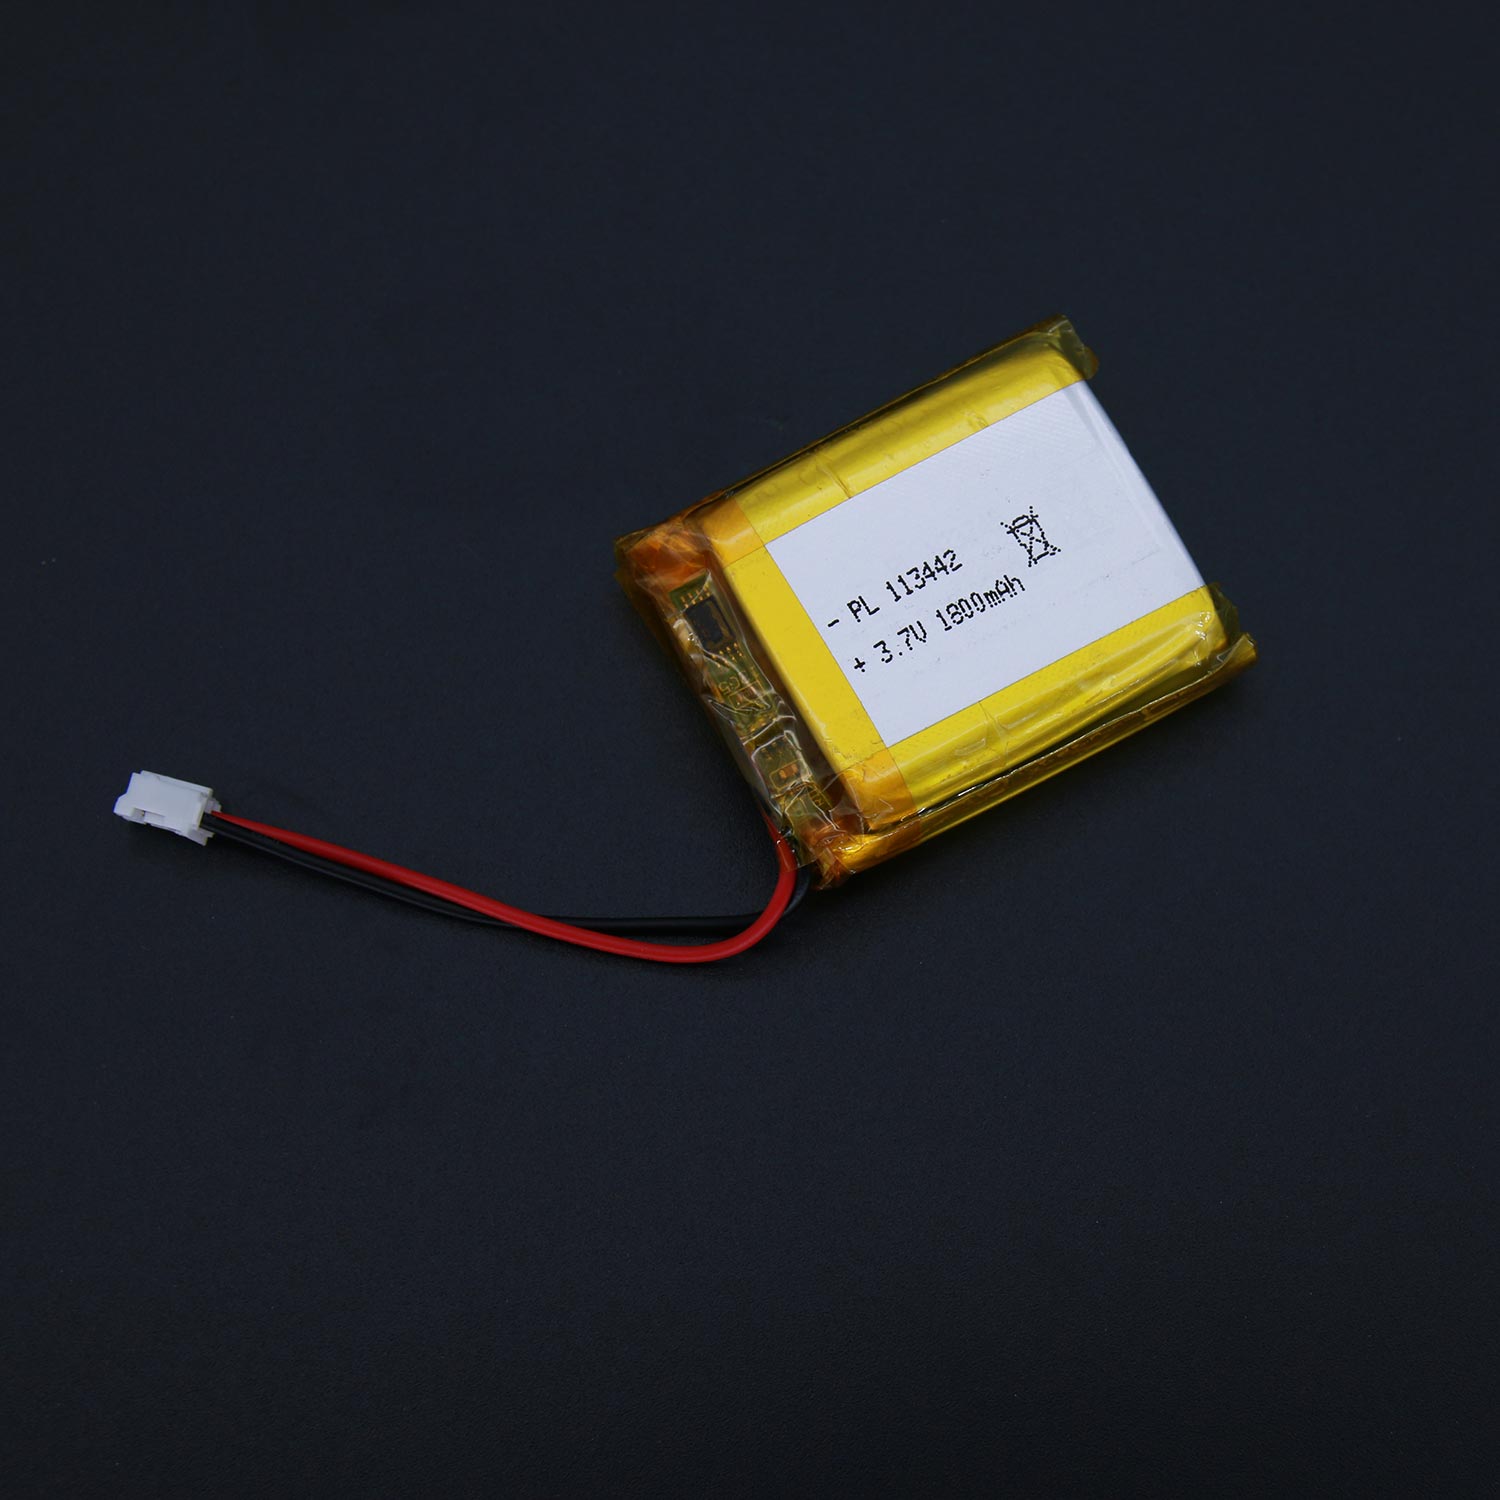 YDL 3.7V 1800mAh 113442 Rechargeable Lithium Polymer Battery